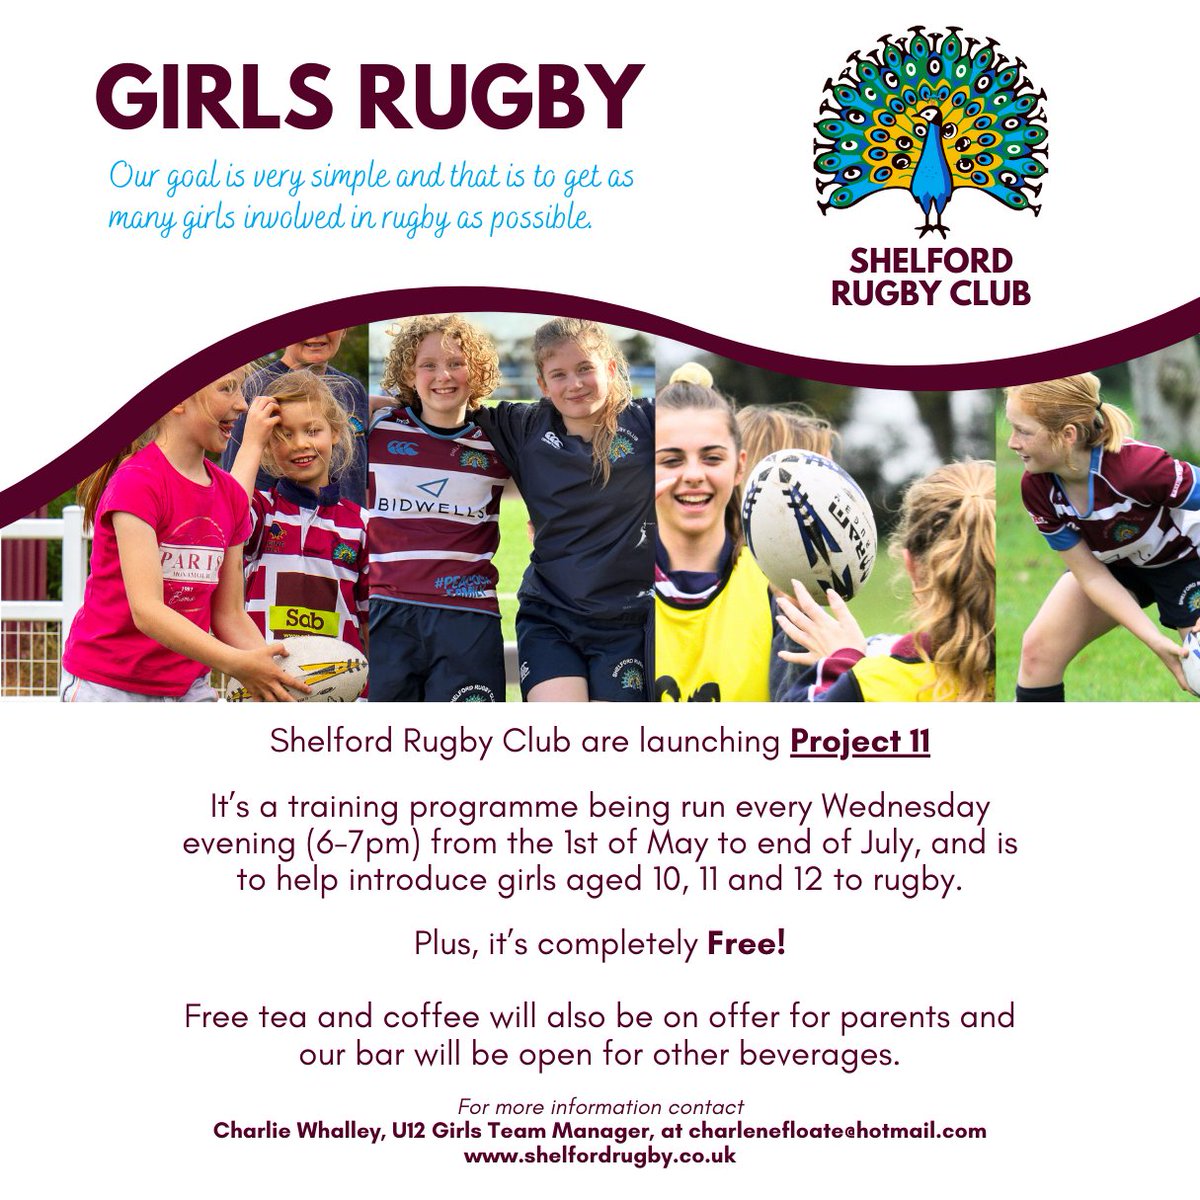 We are bringing back our Project 11, which is a training programme to help introduce Girls aged 10 to 12 to rugby. Its every Wednesday evening (6-7pm) from the 1st of May to end of July. Plus, it’s completely Free!

For more info contact: charlenefloate@hotmail.com

#girlsrugby